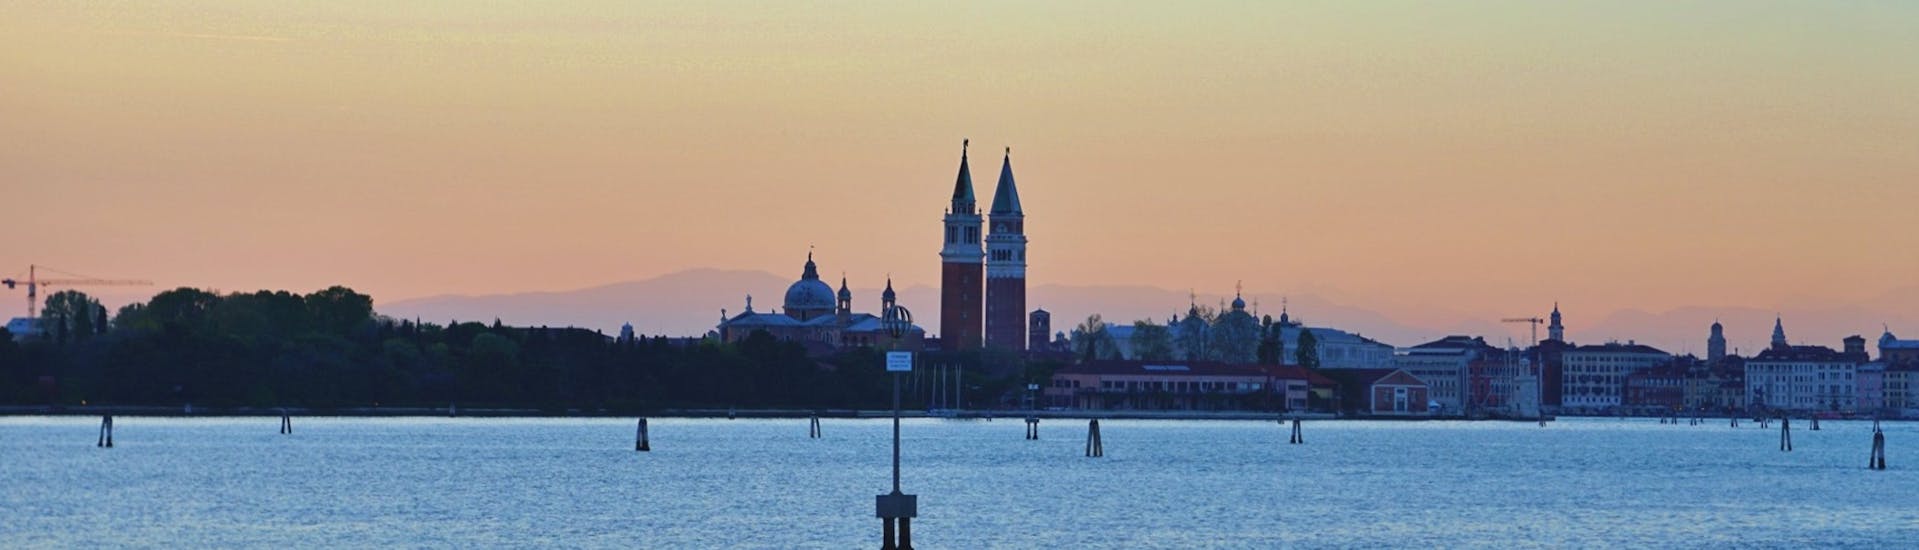 View of Venice from the boat at sunset during the Sunset Boat Trip in Venice with Il Doge di Venezia.